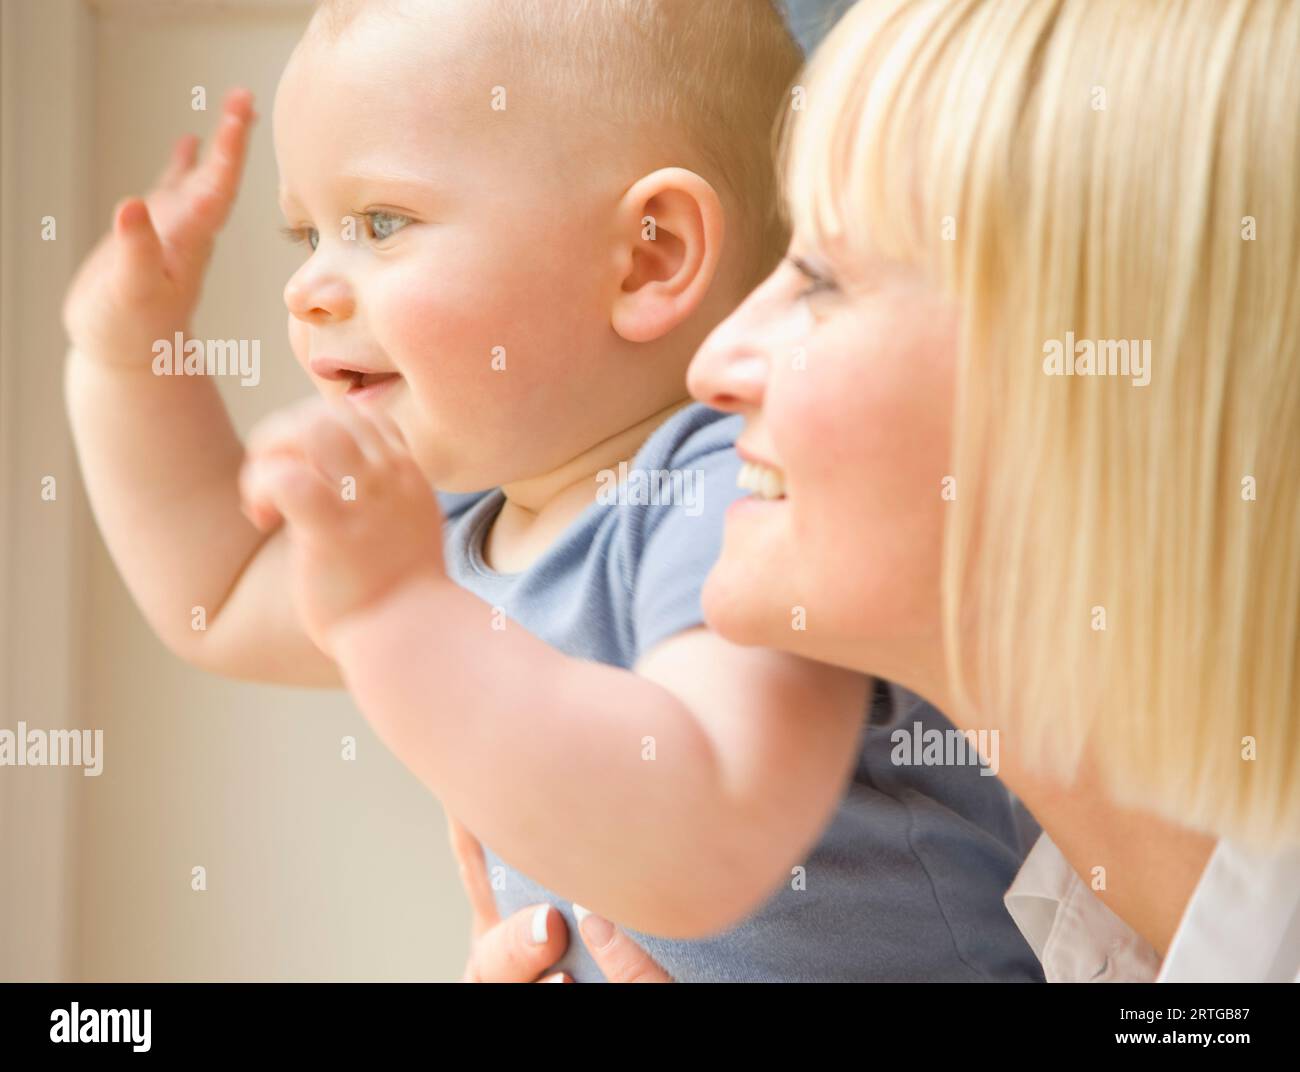 Close up of a baby waving his arms with his mother holding him Stock Photo